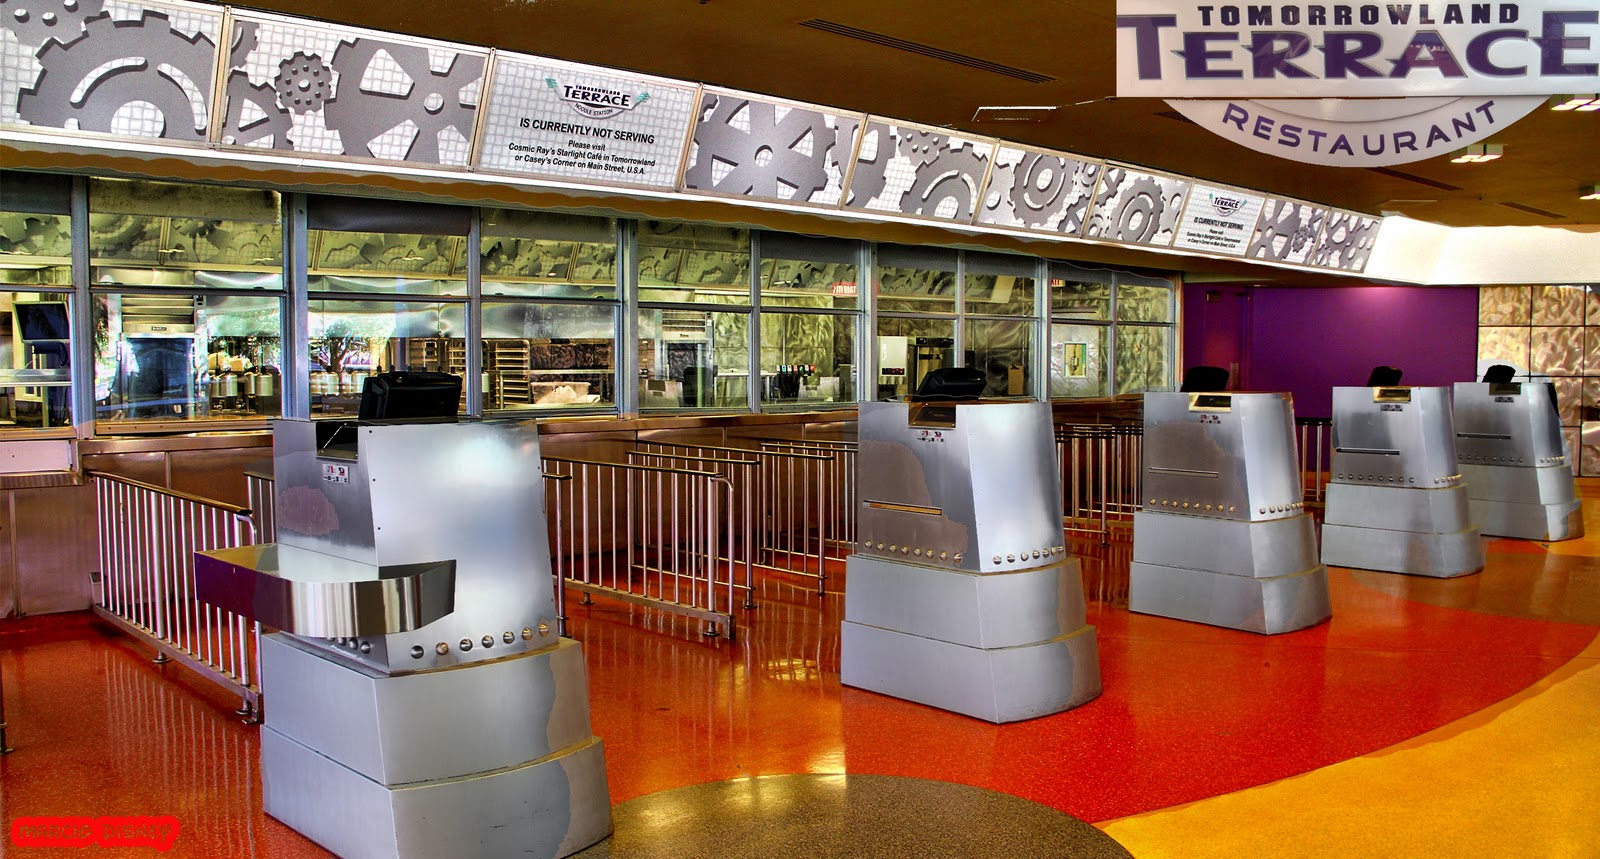 The Walt Disney World Picture of the Day: Tomorrowland Terrace